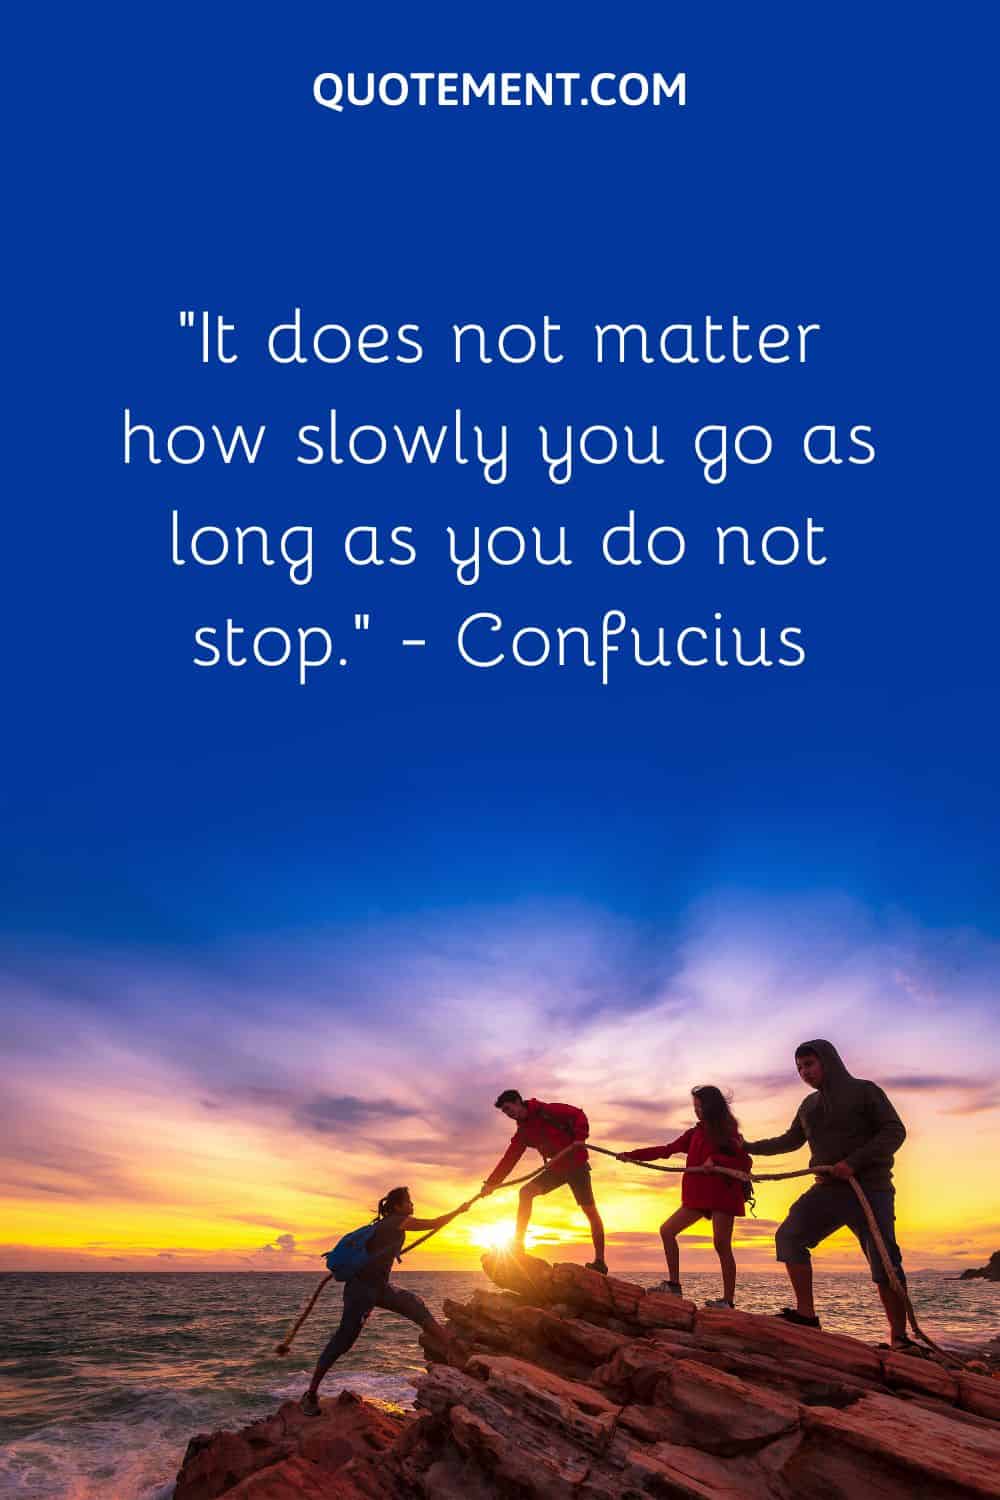 It does not matter how slowly you go as long as you do not stop. — Confucius